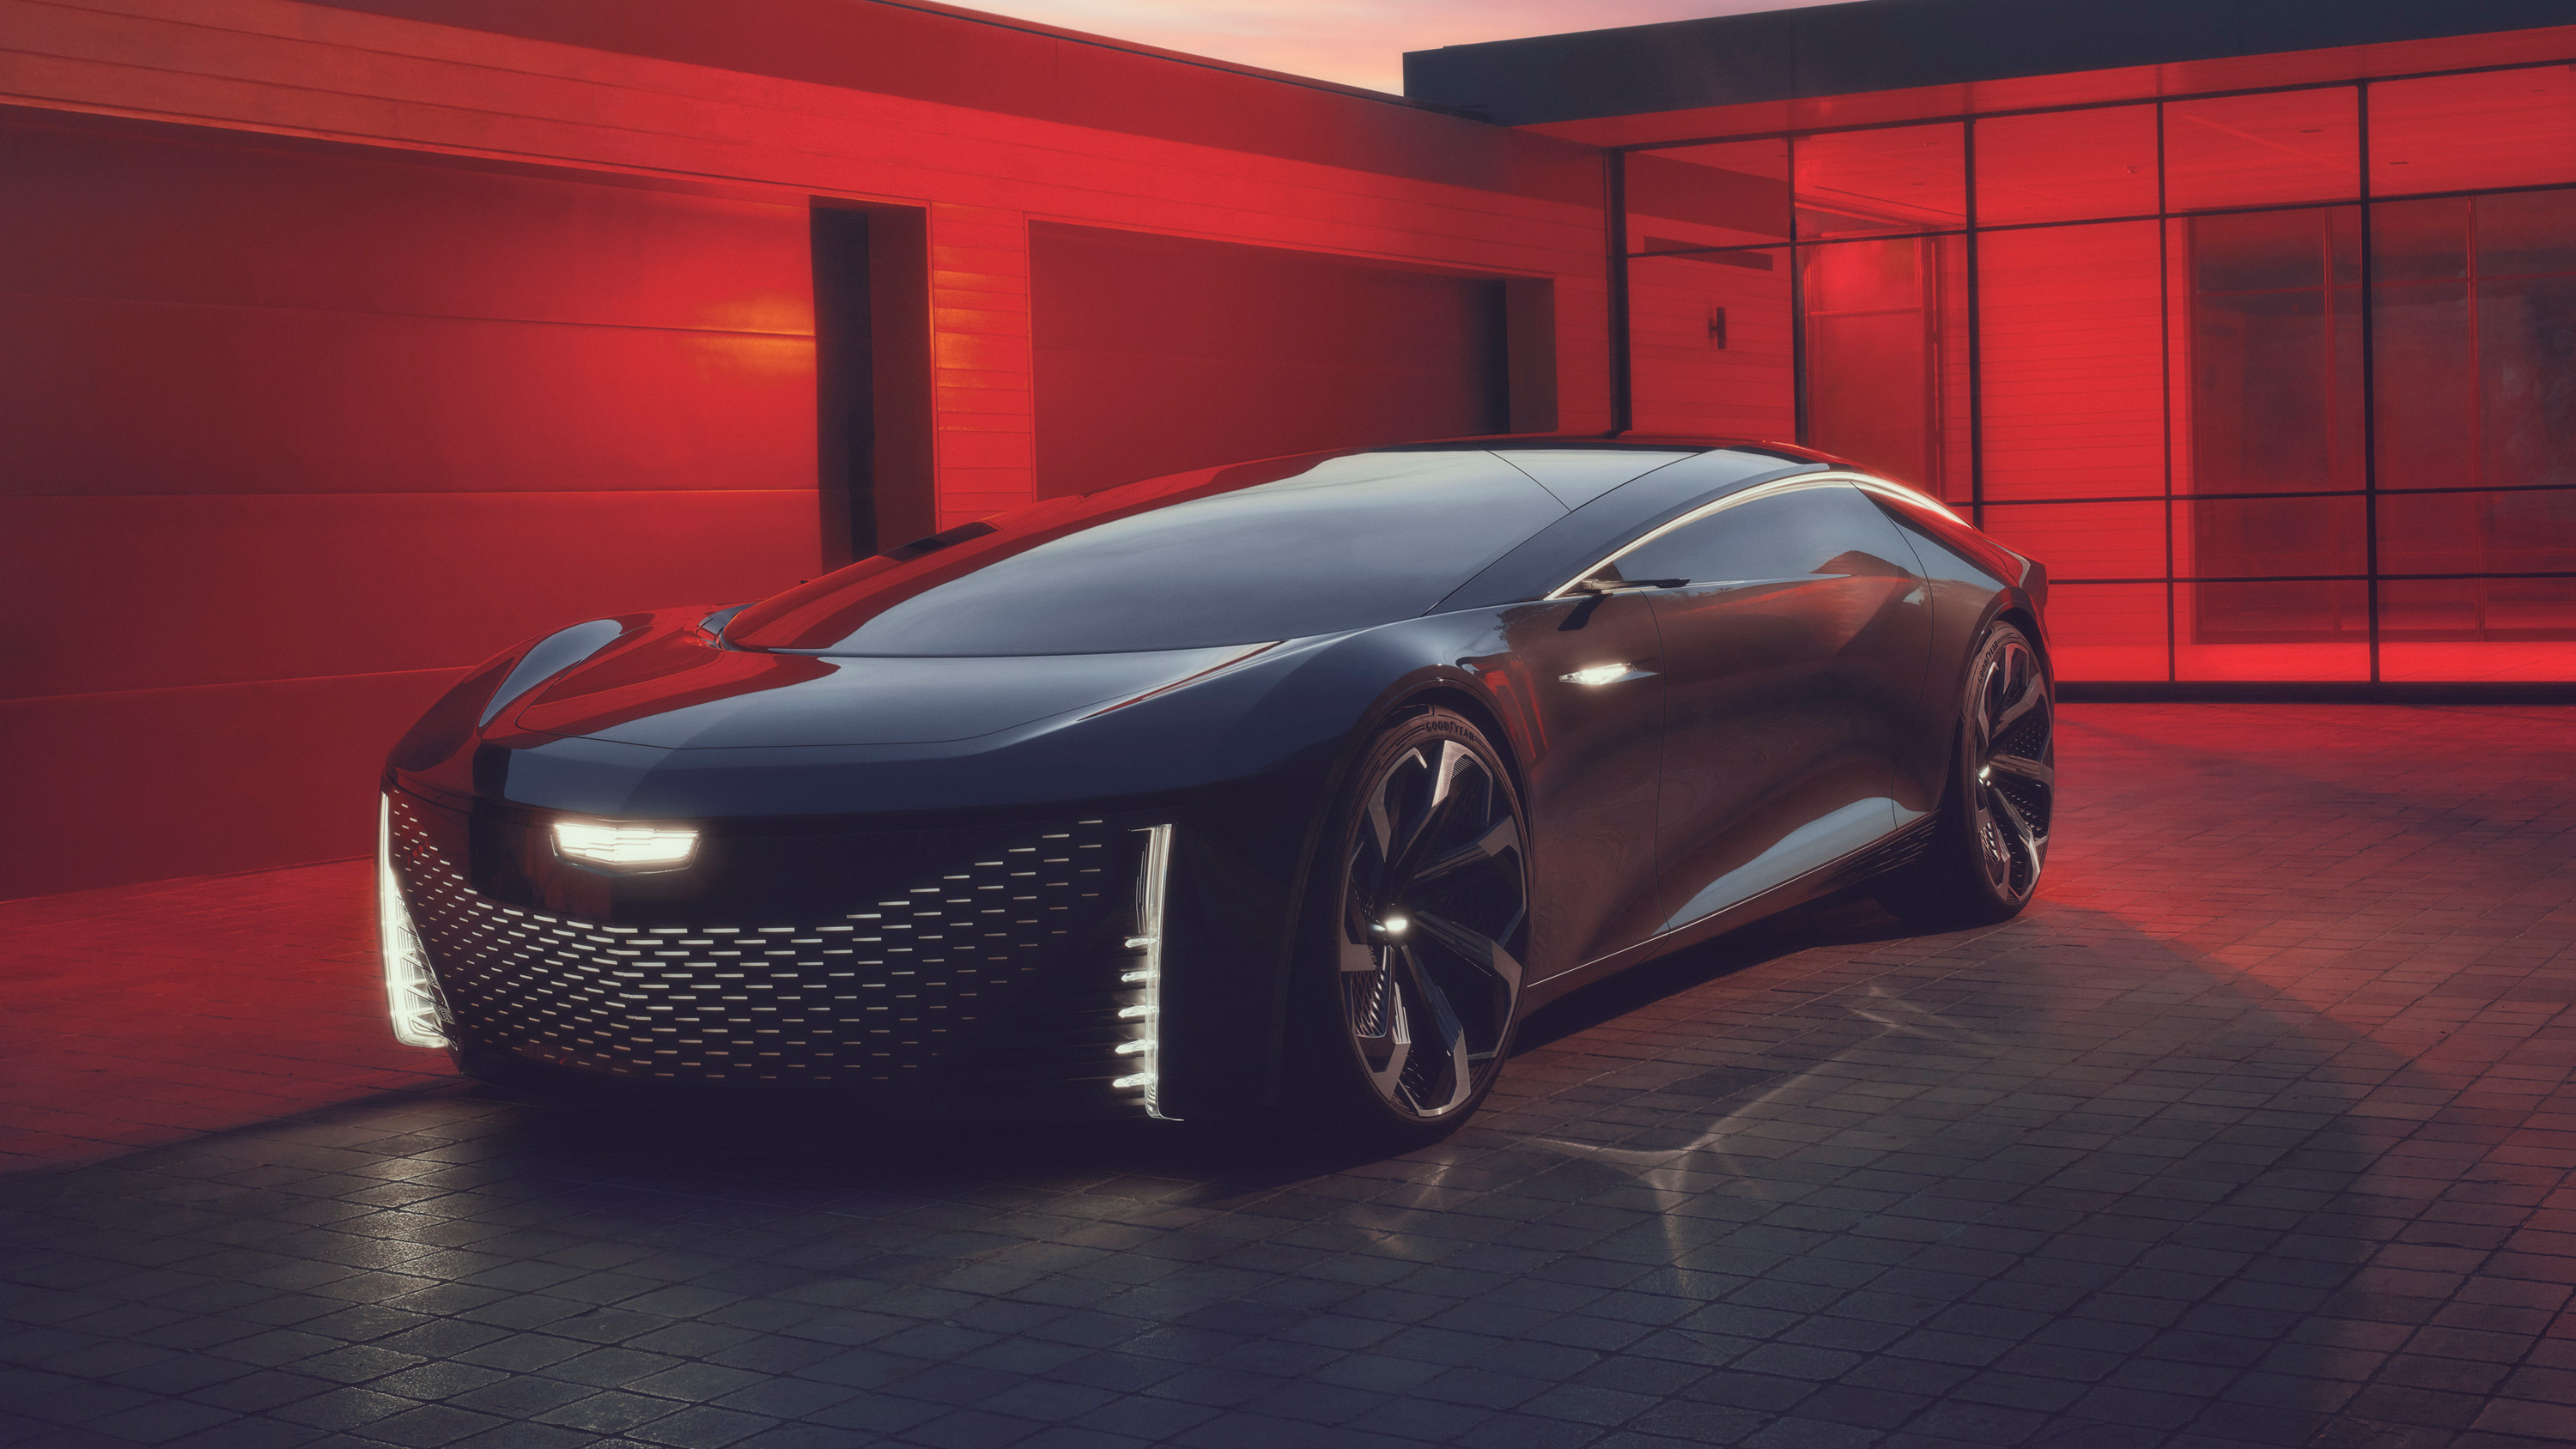 Cadillac InnerSpace concept parked outside modern home in red lighting